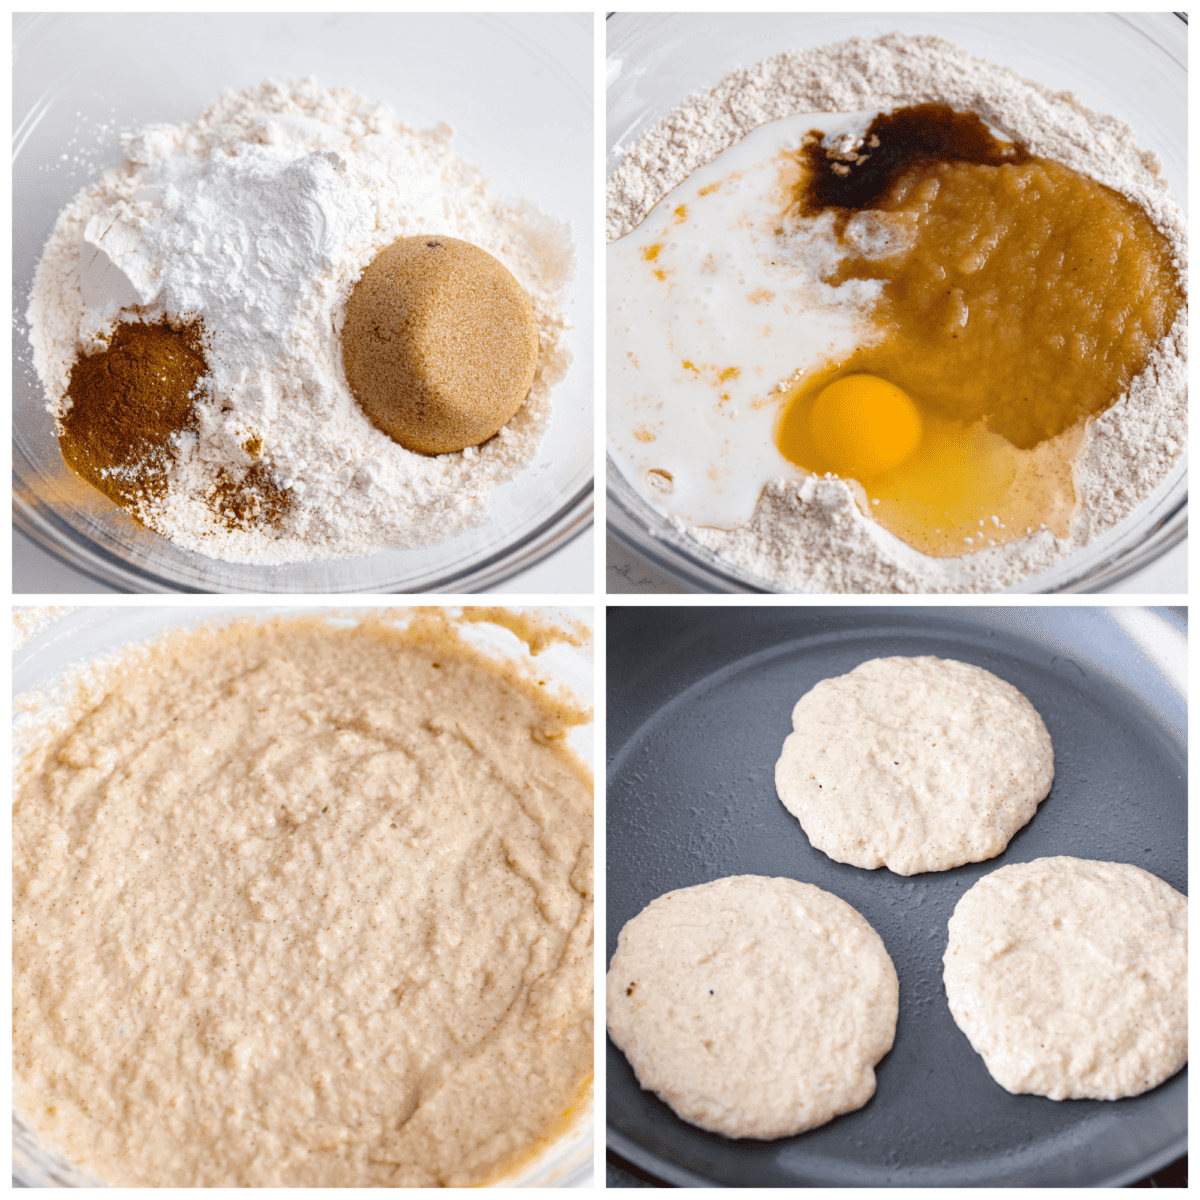 First photo of dry ingredients in a bowl. Second photo of wet ingredients added to the dry ingredients. Third photo of applesauce pancake batter in a bowl. Fourth photo of applesauce pancakes cooking in a skillet.